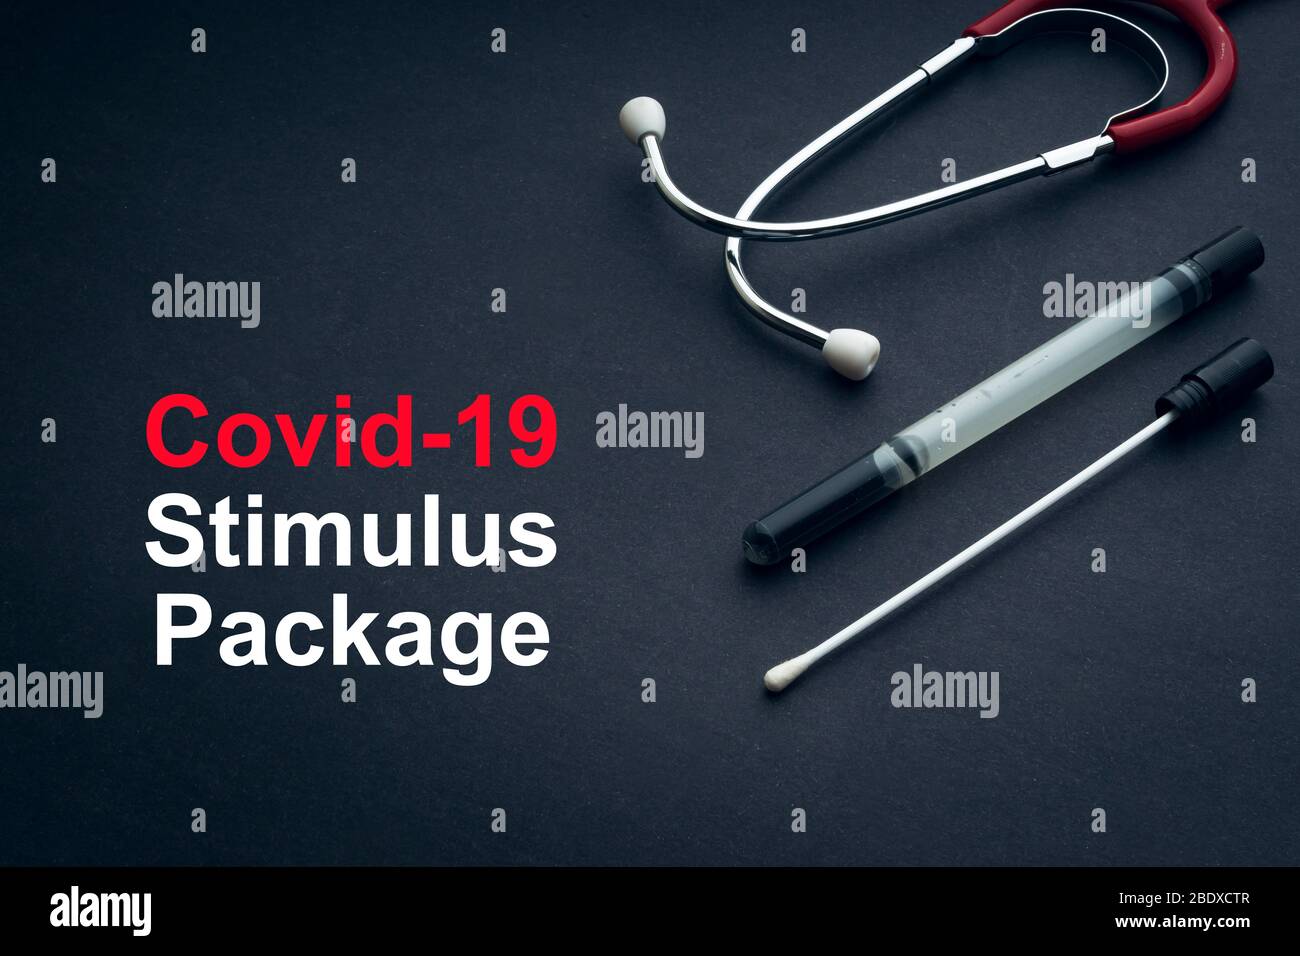 COVID-19 or CORONAVIRUS STIMULUS PACKAGE text with stethoscope and medical swab on black background. Covid-19 or Coronavirus concept. Stock Photo